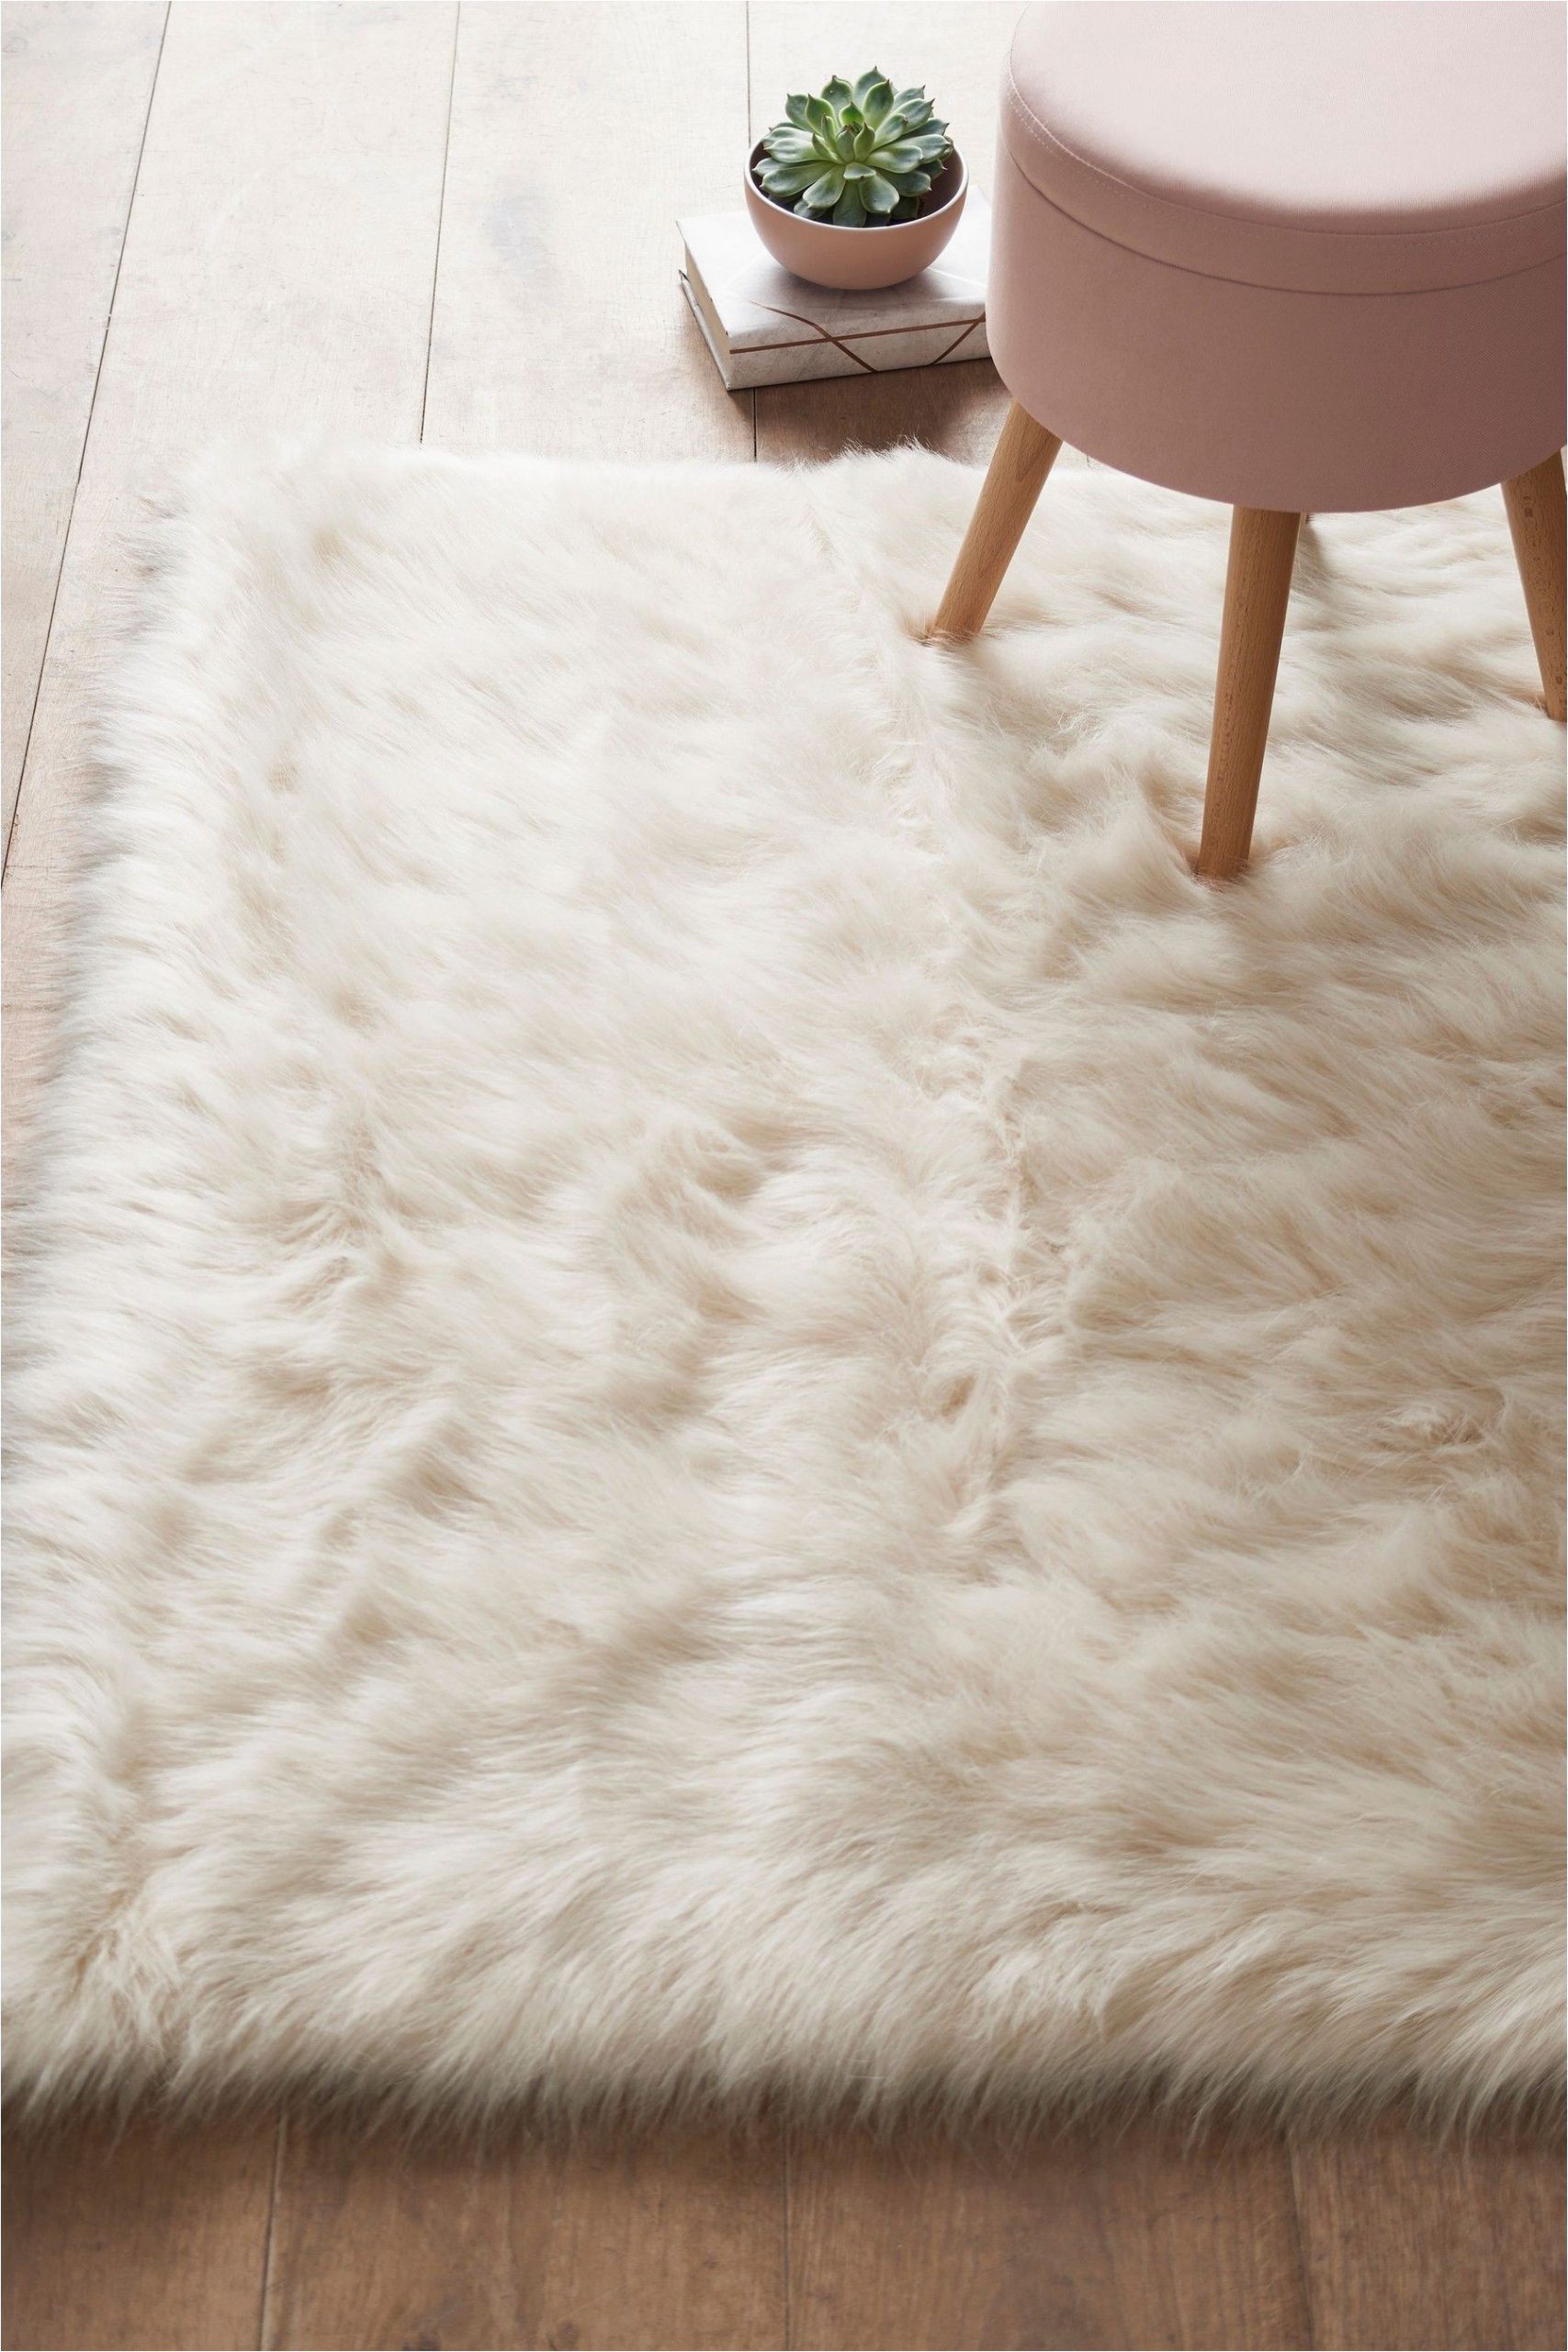 Faux Fur area Rugs 9×12 200 Best area Rugs Images In 2020